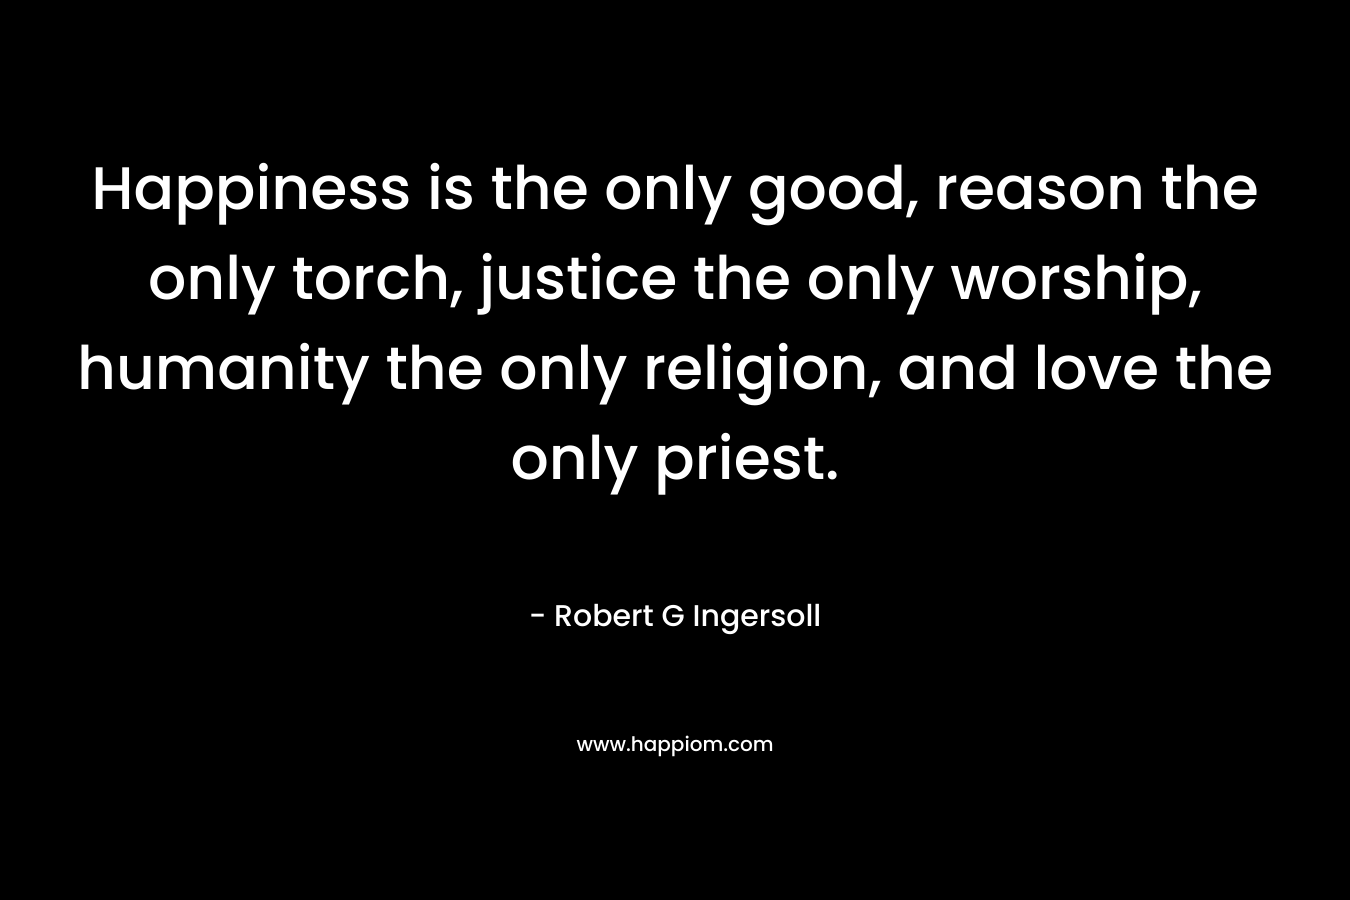 Happiness is the only good, reason the only torch, justice the only worship, humanity the only religion, and love the only priest. – Robert G Ingersoll